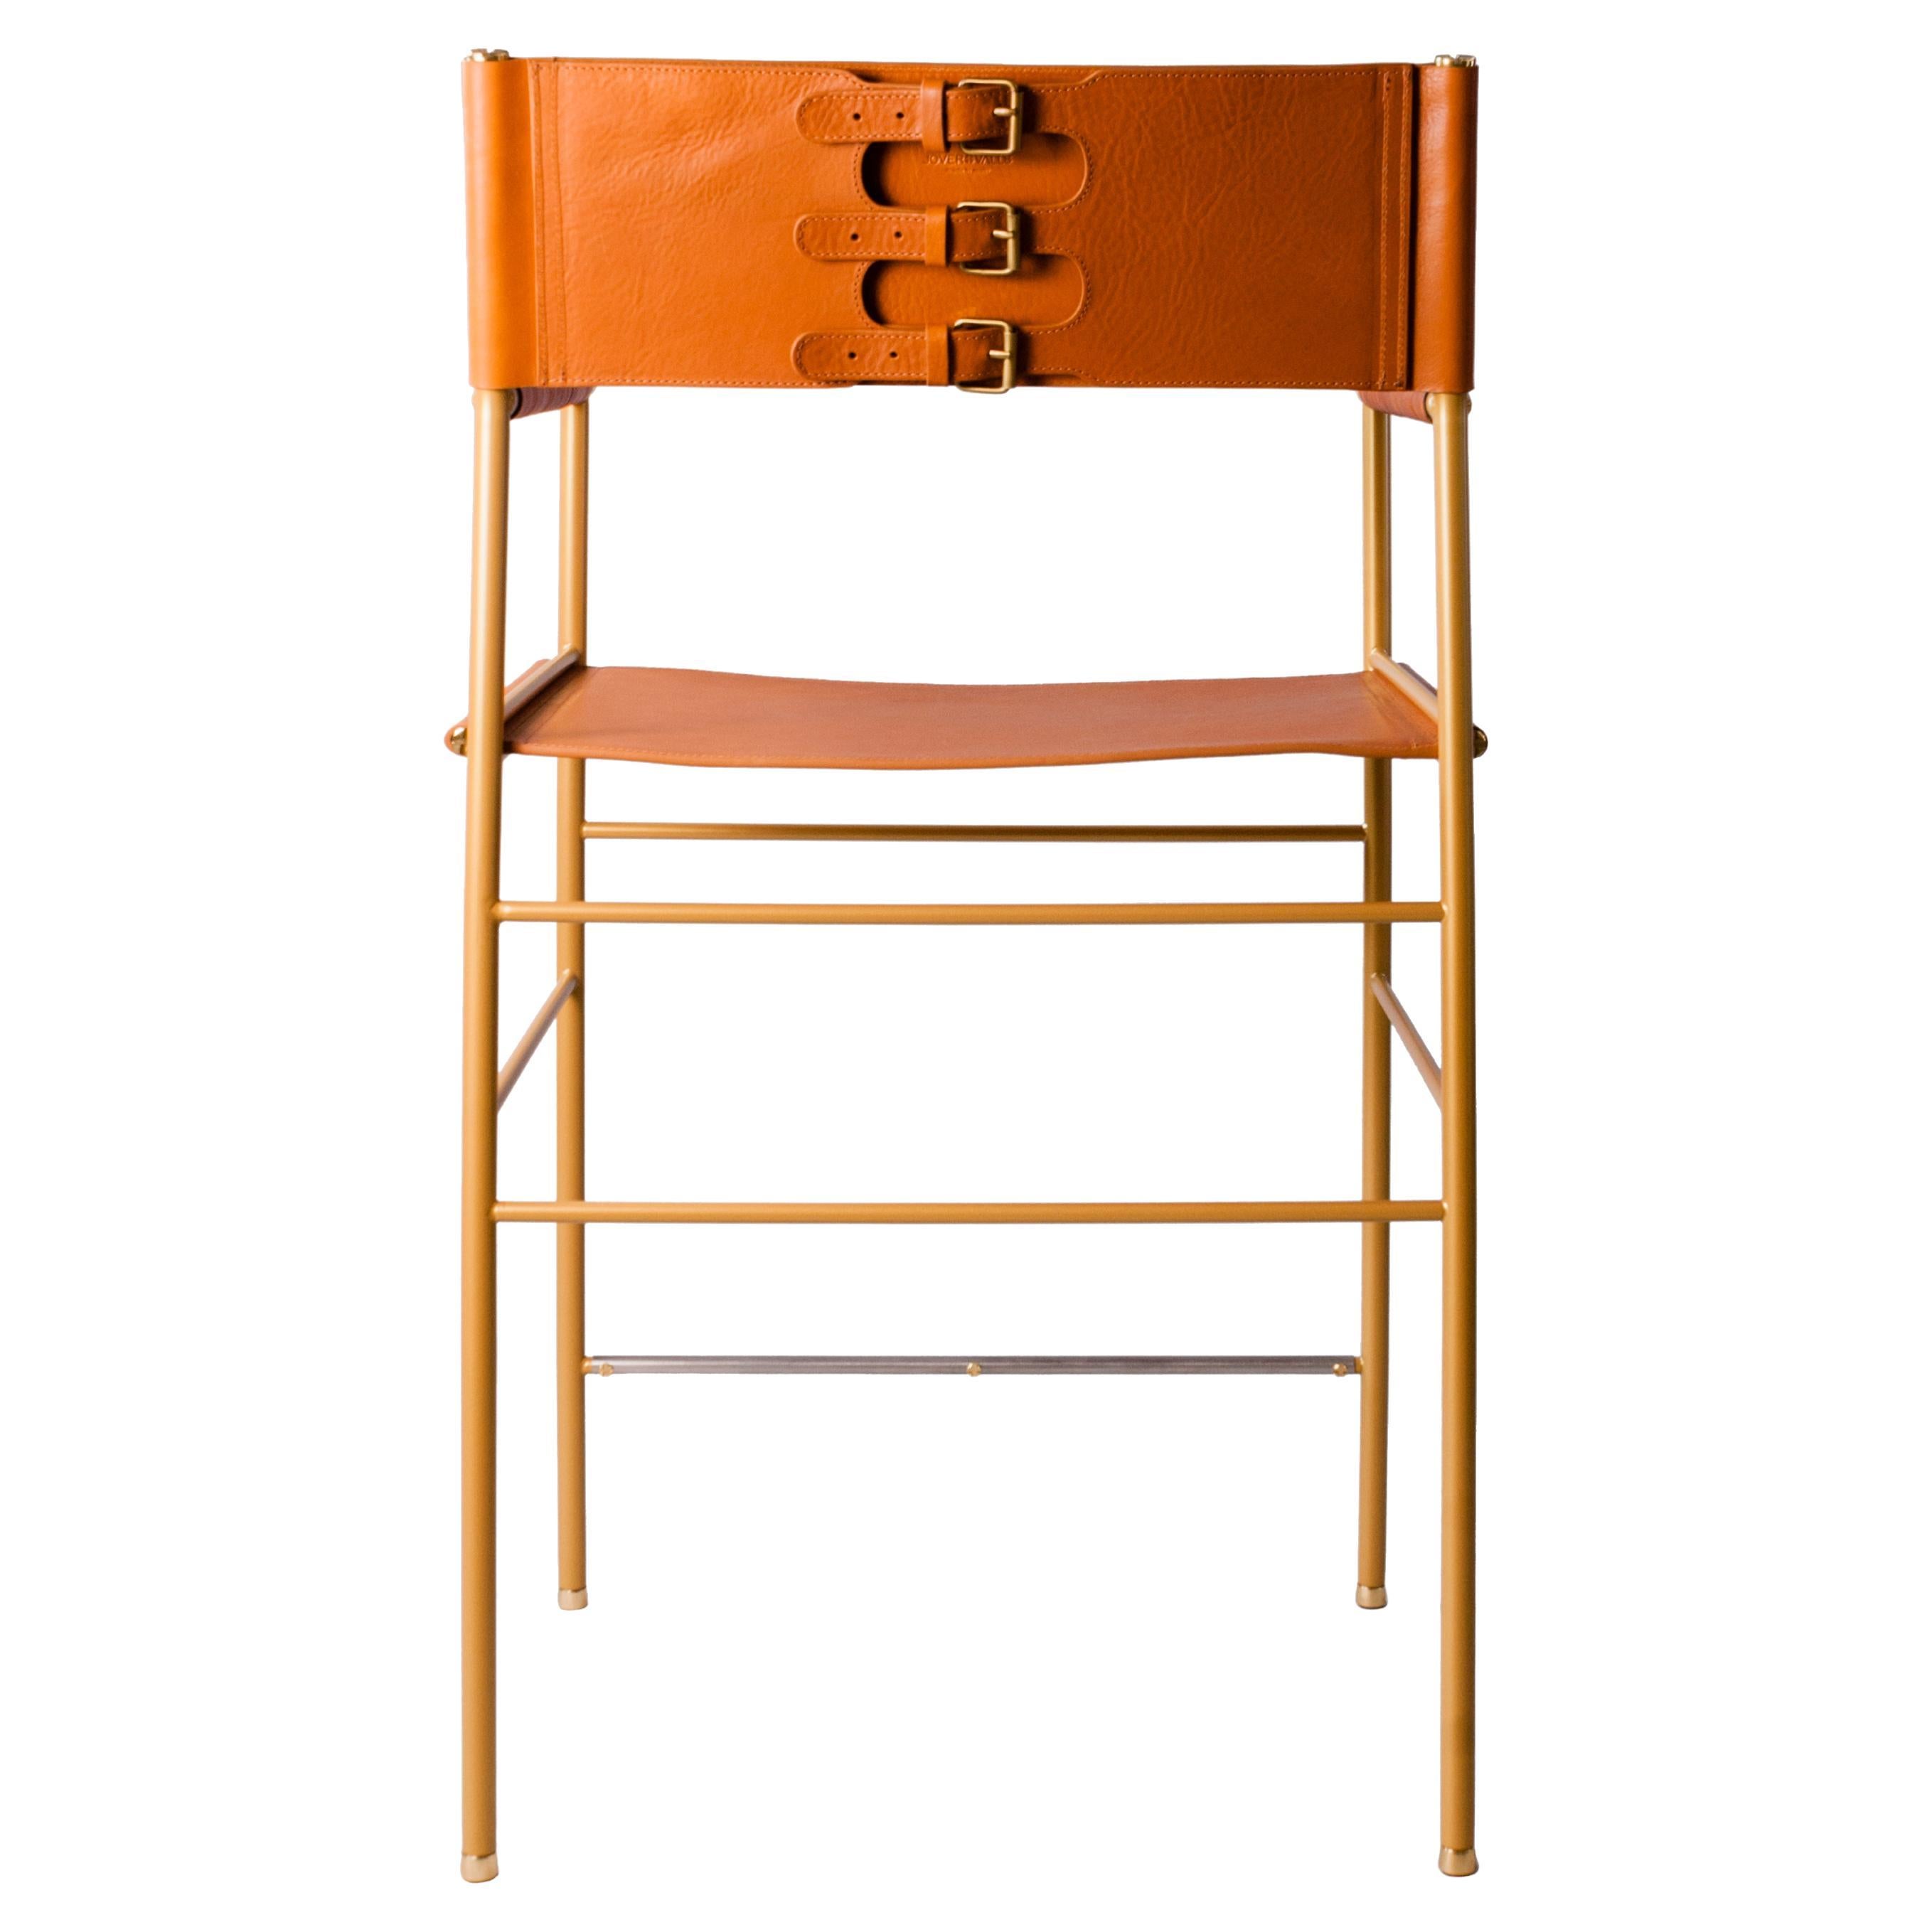 Repose Bar Stool w. Backrest, Tan Leather & Aged Brass Powdered Coating Frame